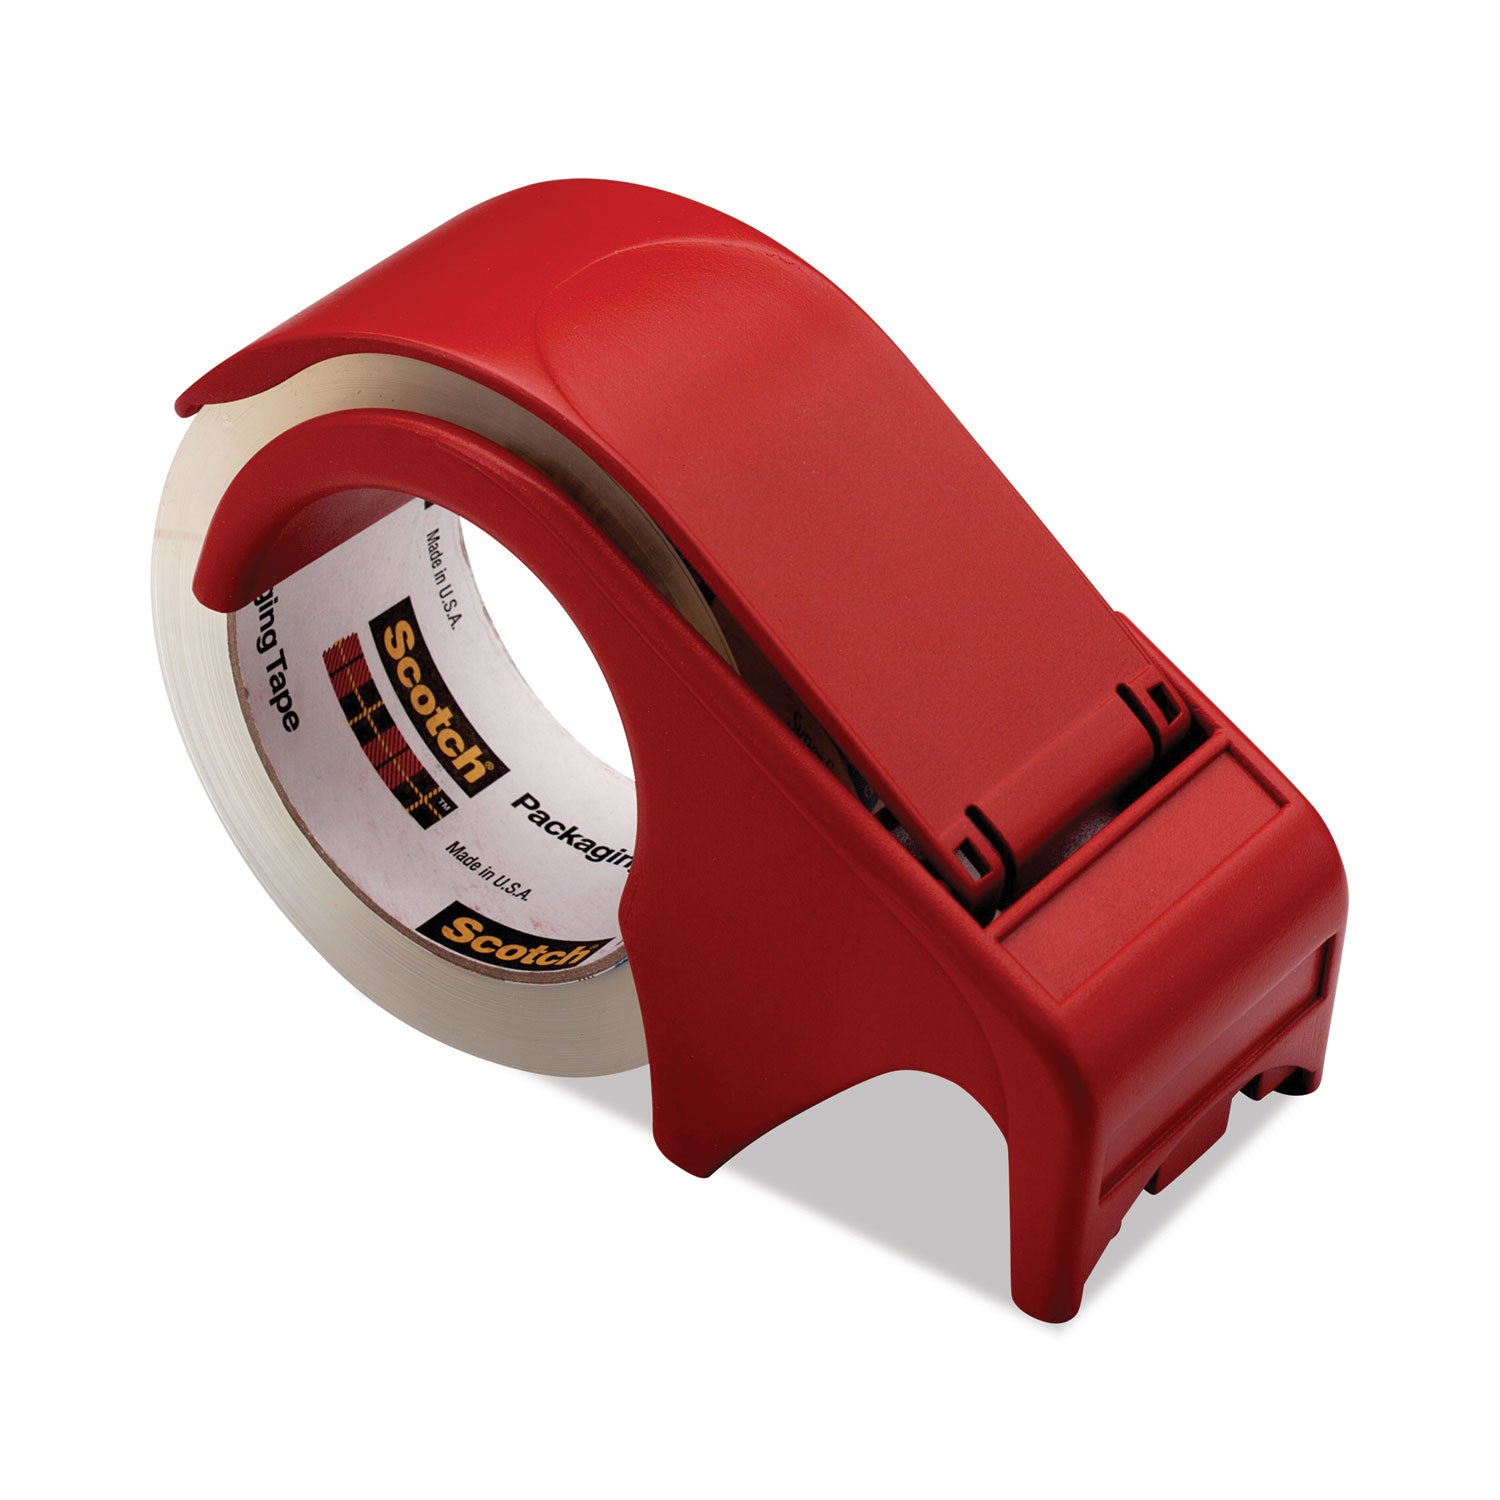 Compact and Quick Loading Dispenser for Box Sealing Tape, 3" Core, For Rolls Up to 2" x 60 yds, Red - 